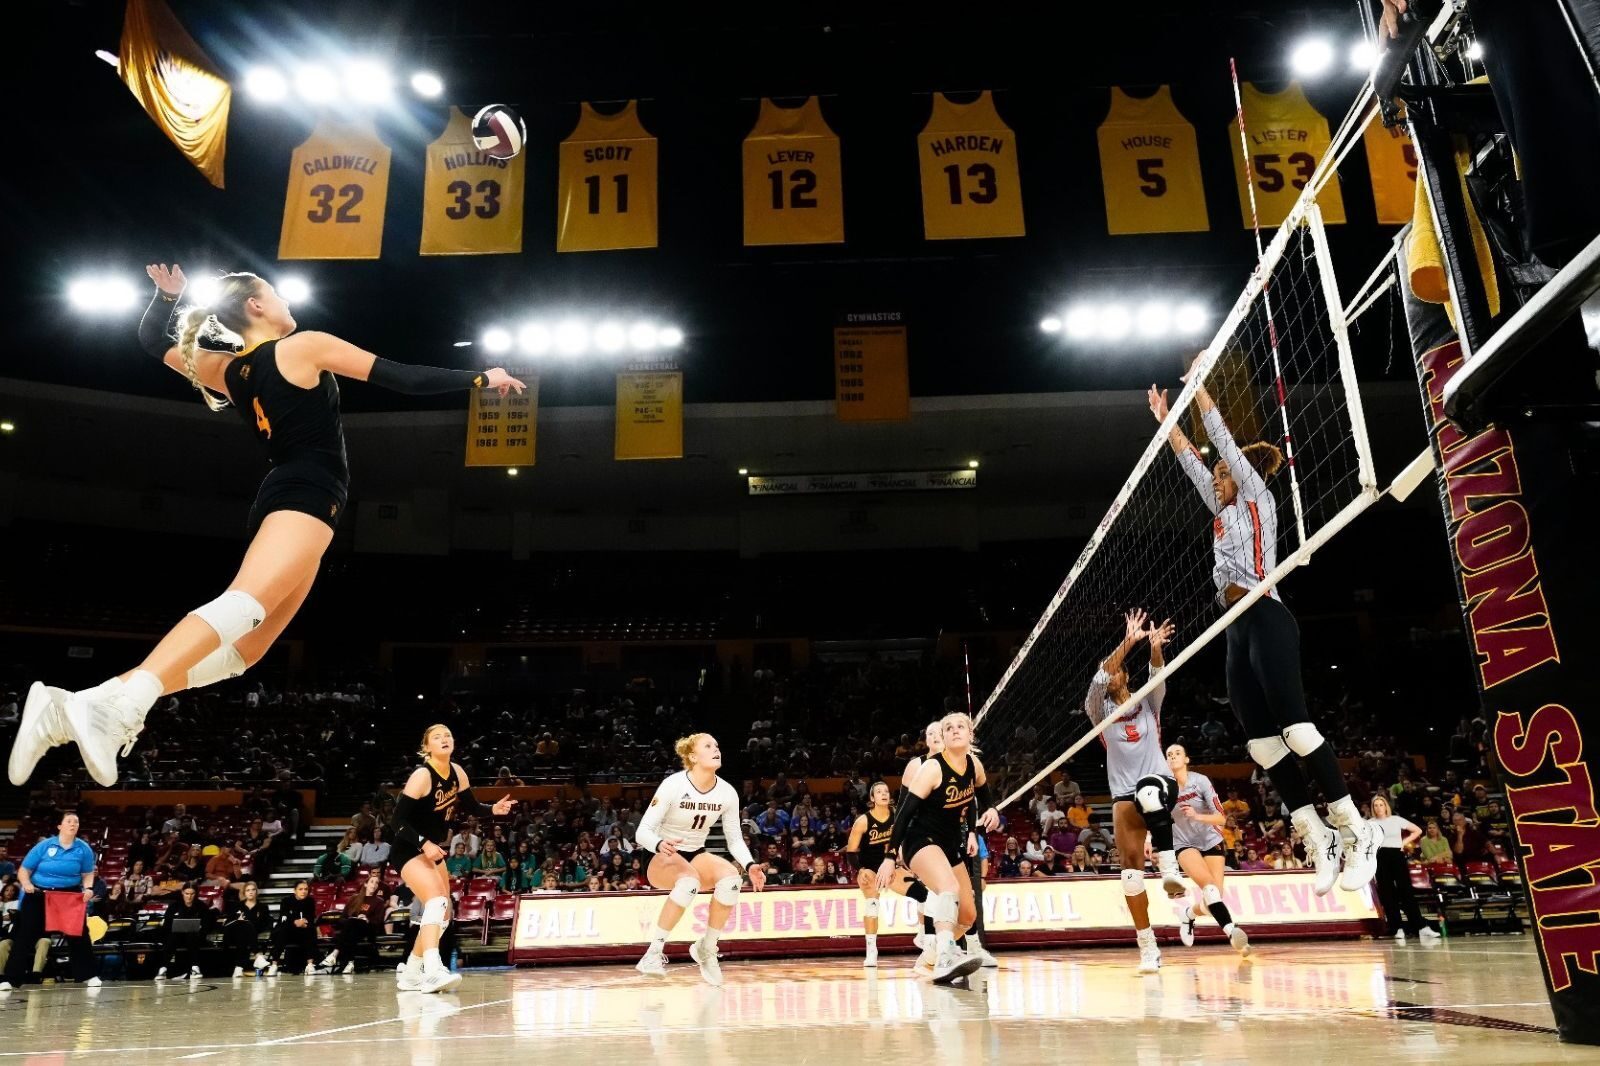 Arizona State women's volleyball team discovered with analytics that his team was practicing too long.